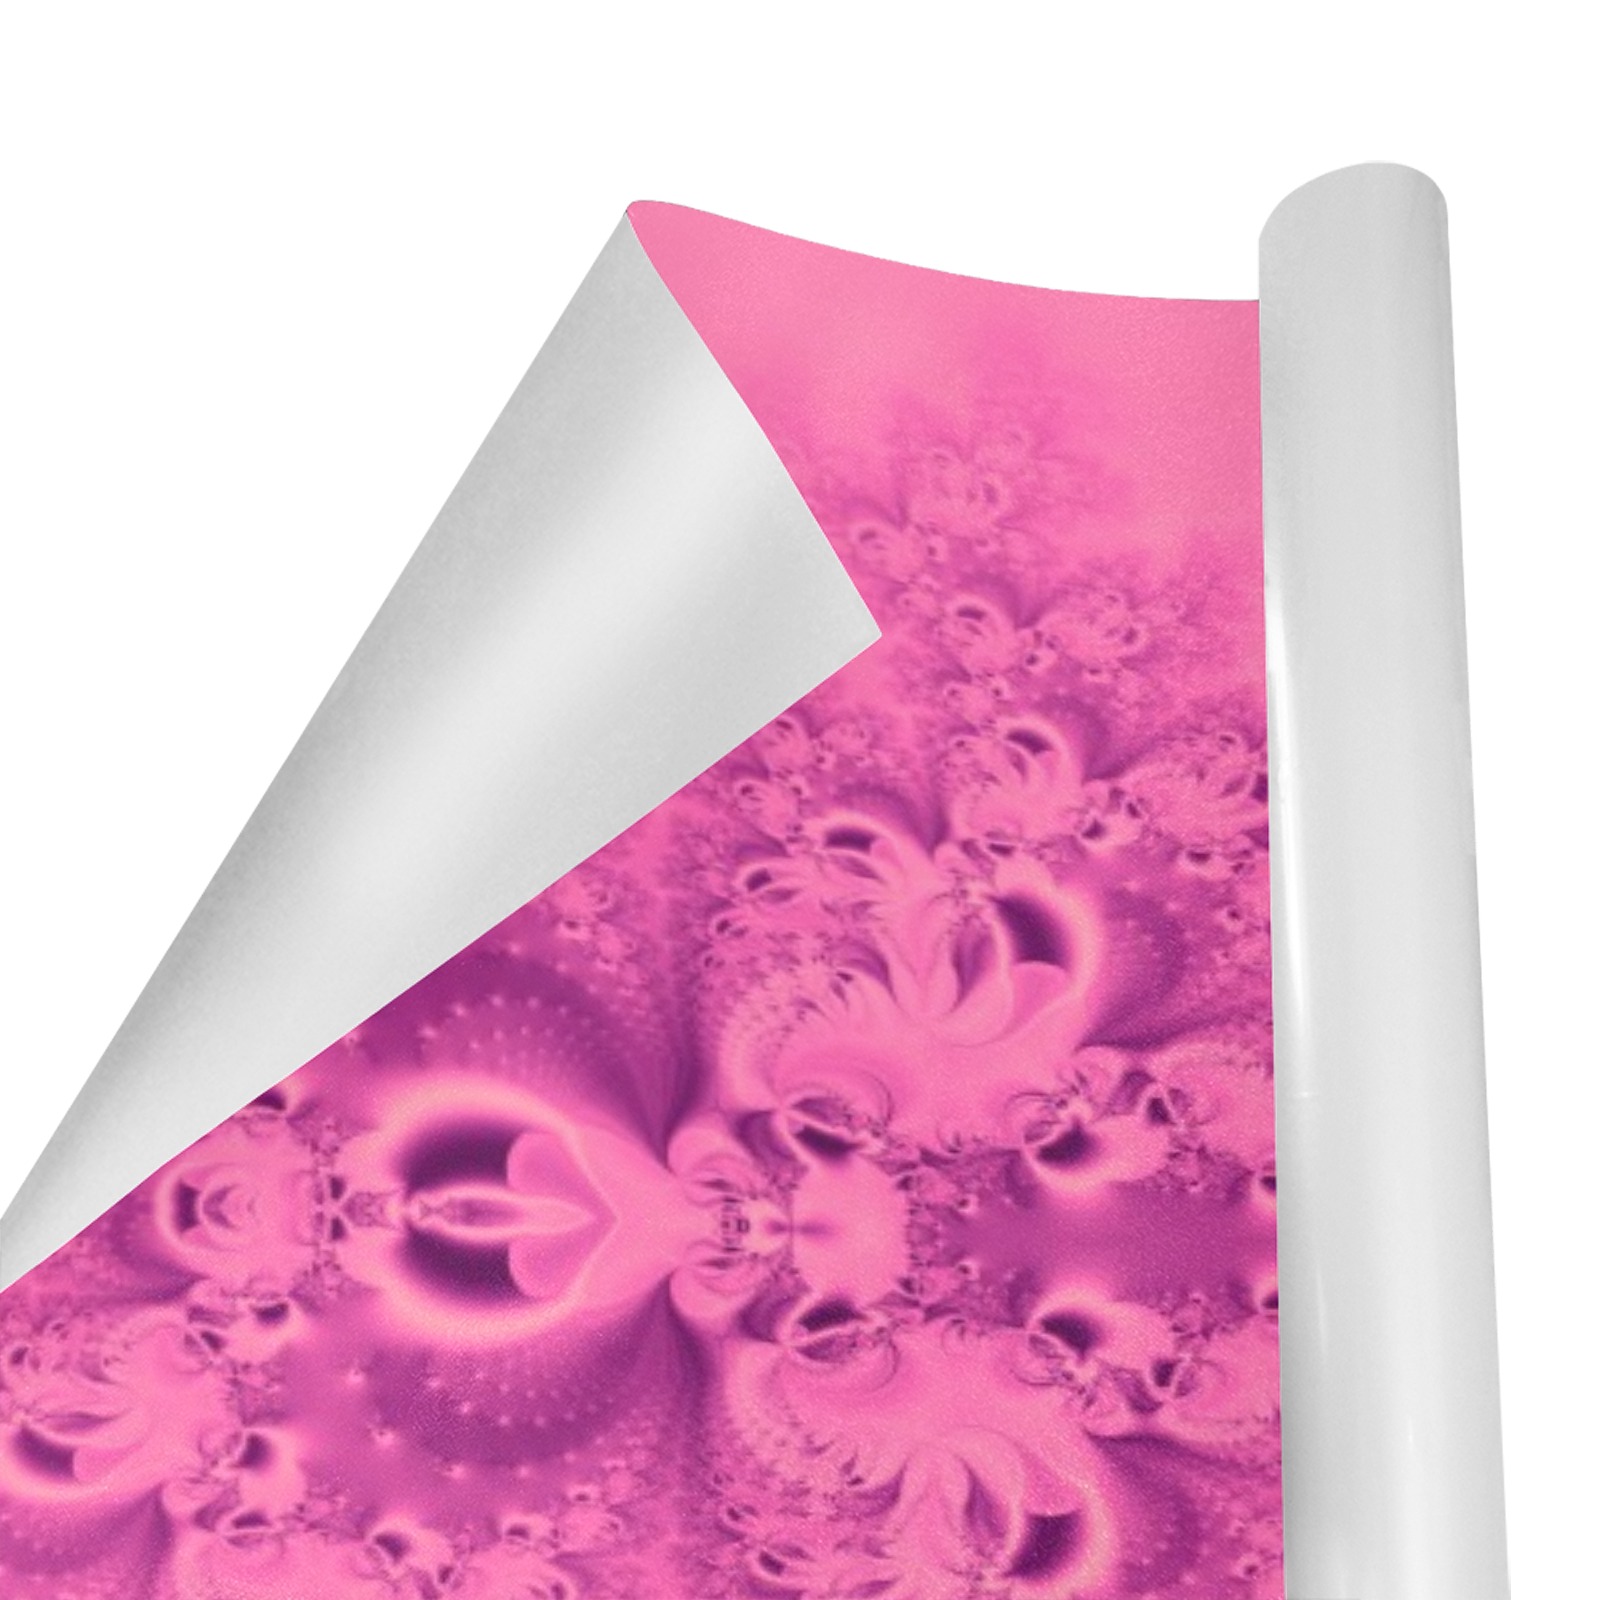 Pink Morning Frost Fractal Gift Wrapping Paper 58"x 23" (2 Rolls)